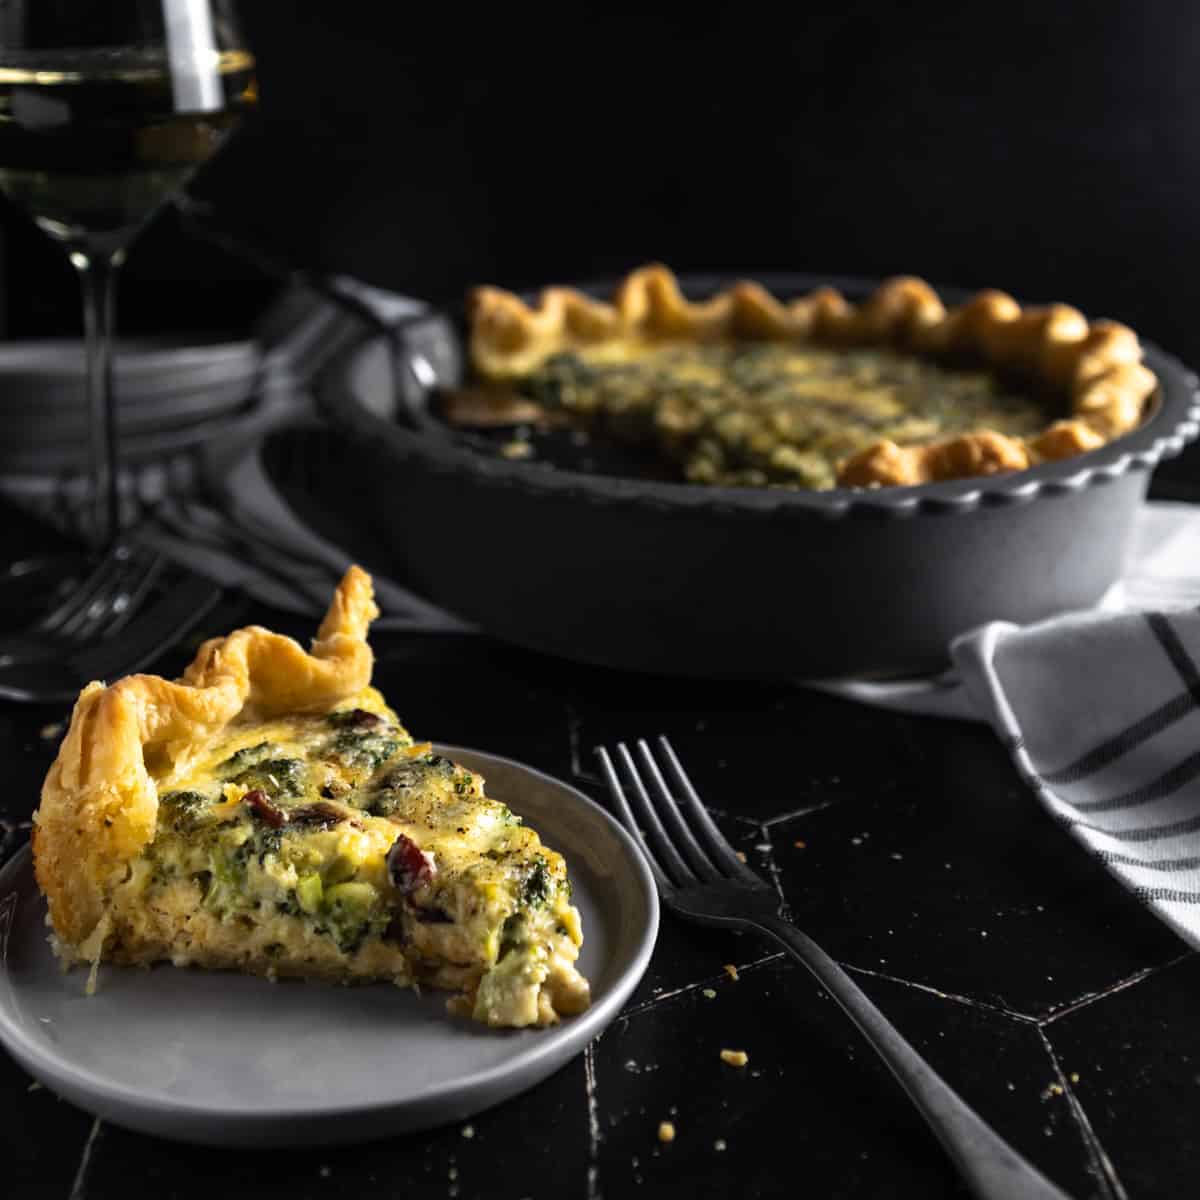 A up-close slice of Bacon Broccoli Quiche on a small plate with a fork. The whole quiche in the pie plate, a stack of small plates and a glass of white wine are in the background